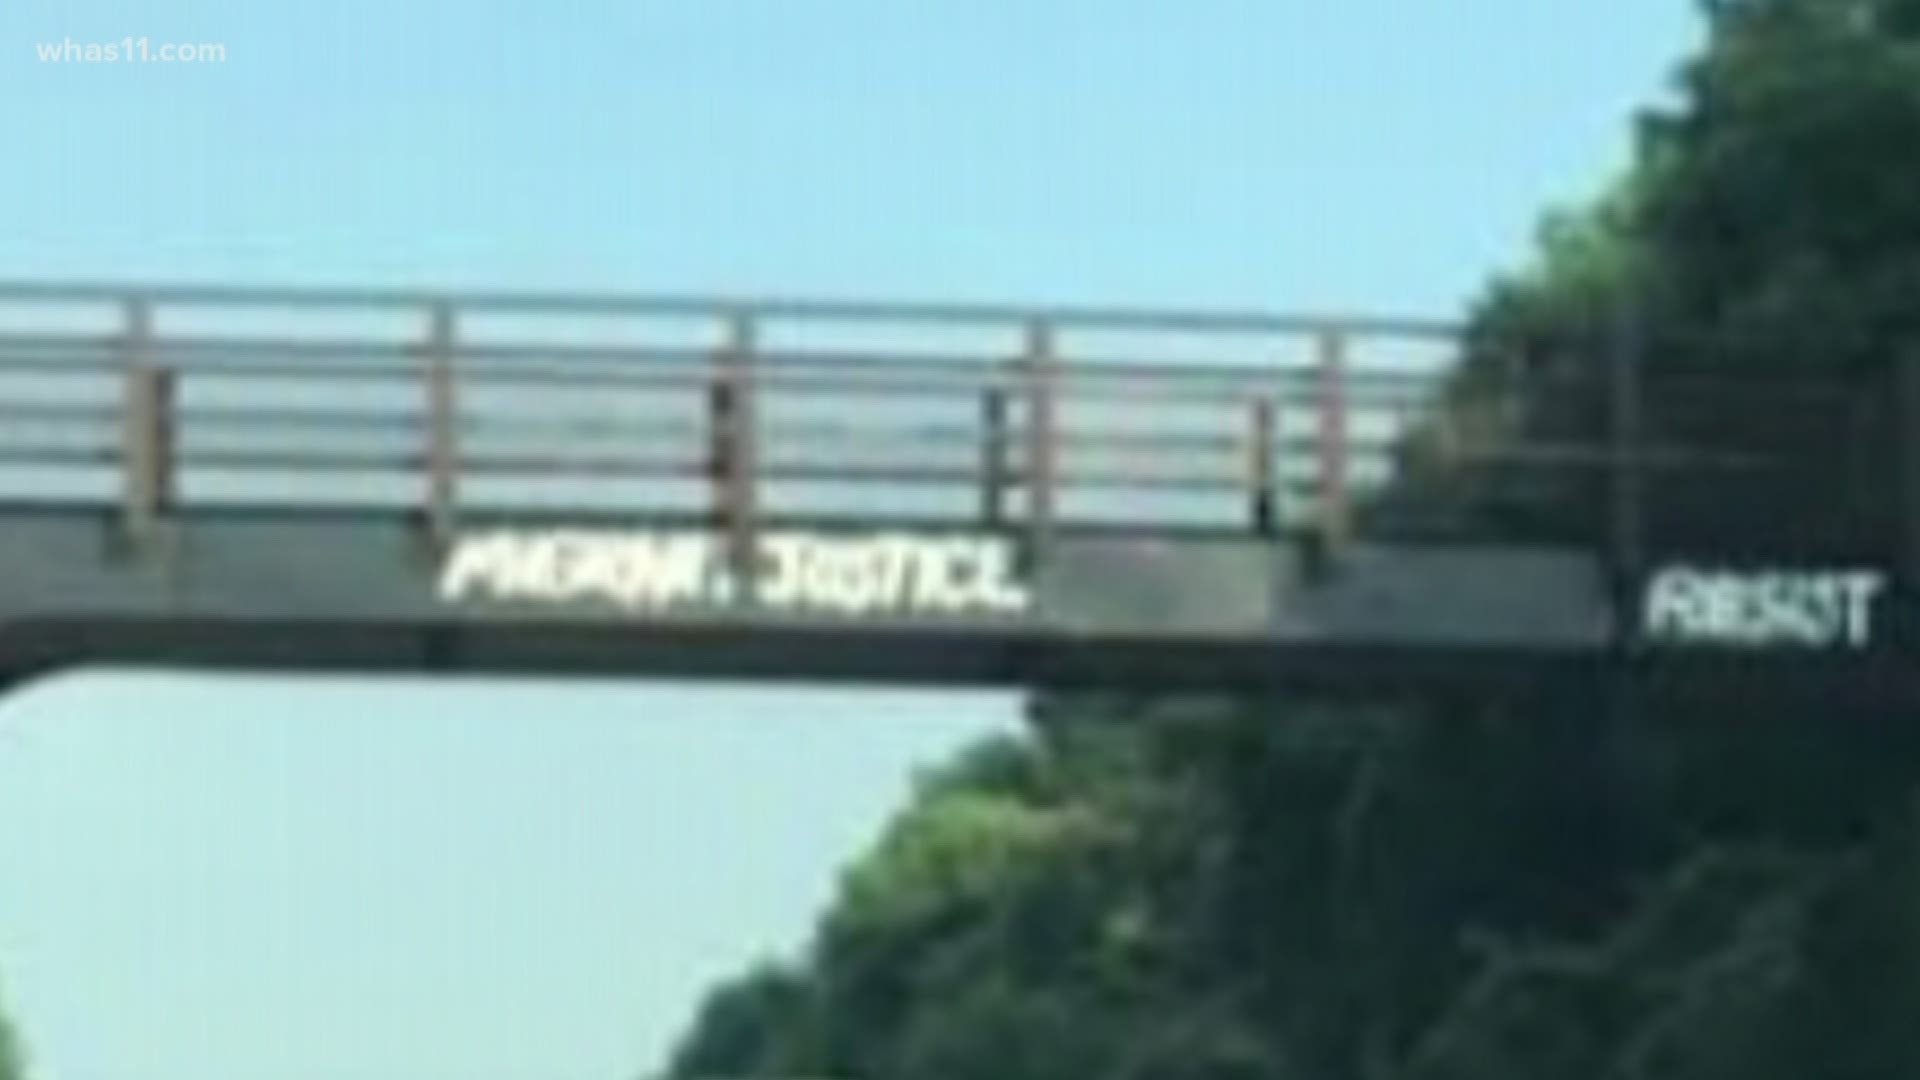 There have been several messages about Donald Trump painted on the bridge along I-64, a little before the Grinstead tunnels.